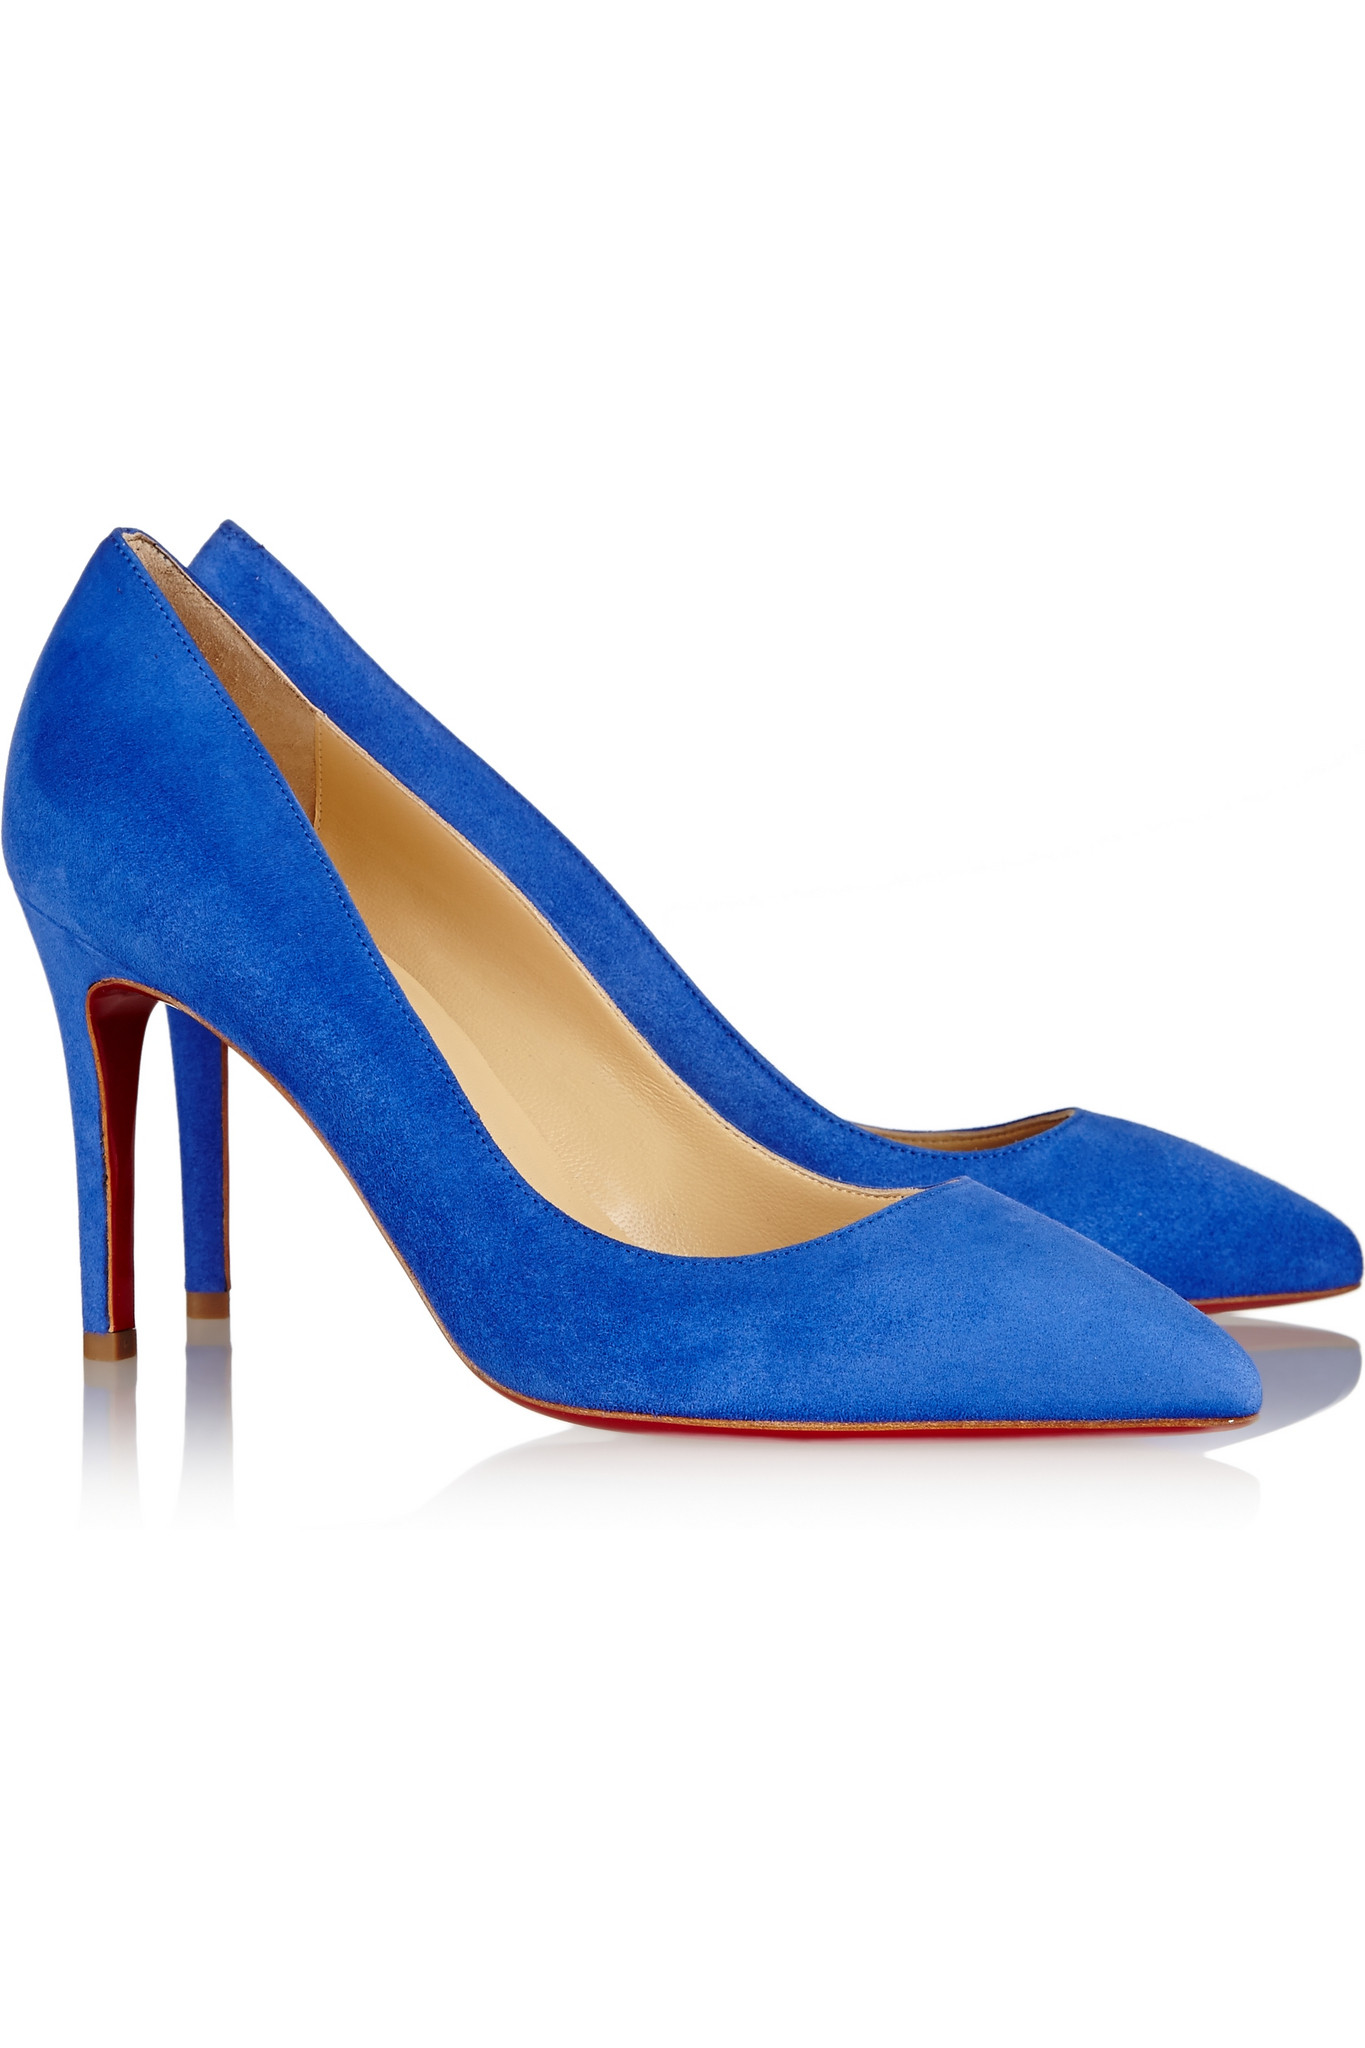 Lyst - Christian Louboutin Pigalle 85 Suede Pumps in Blue